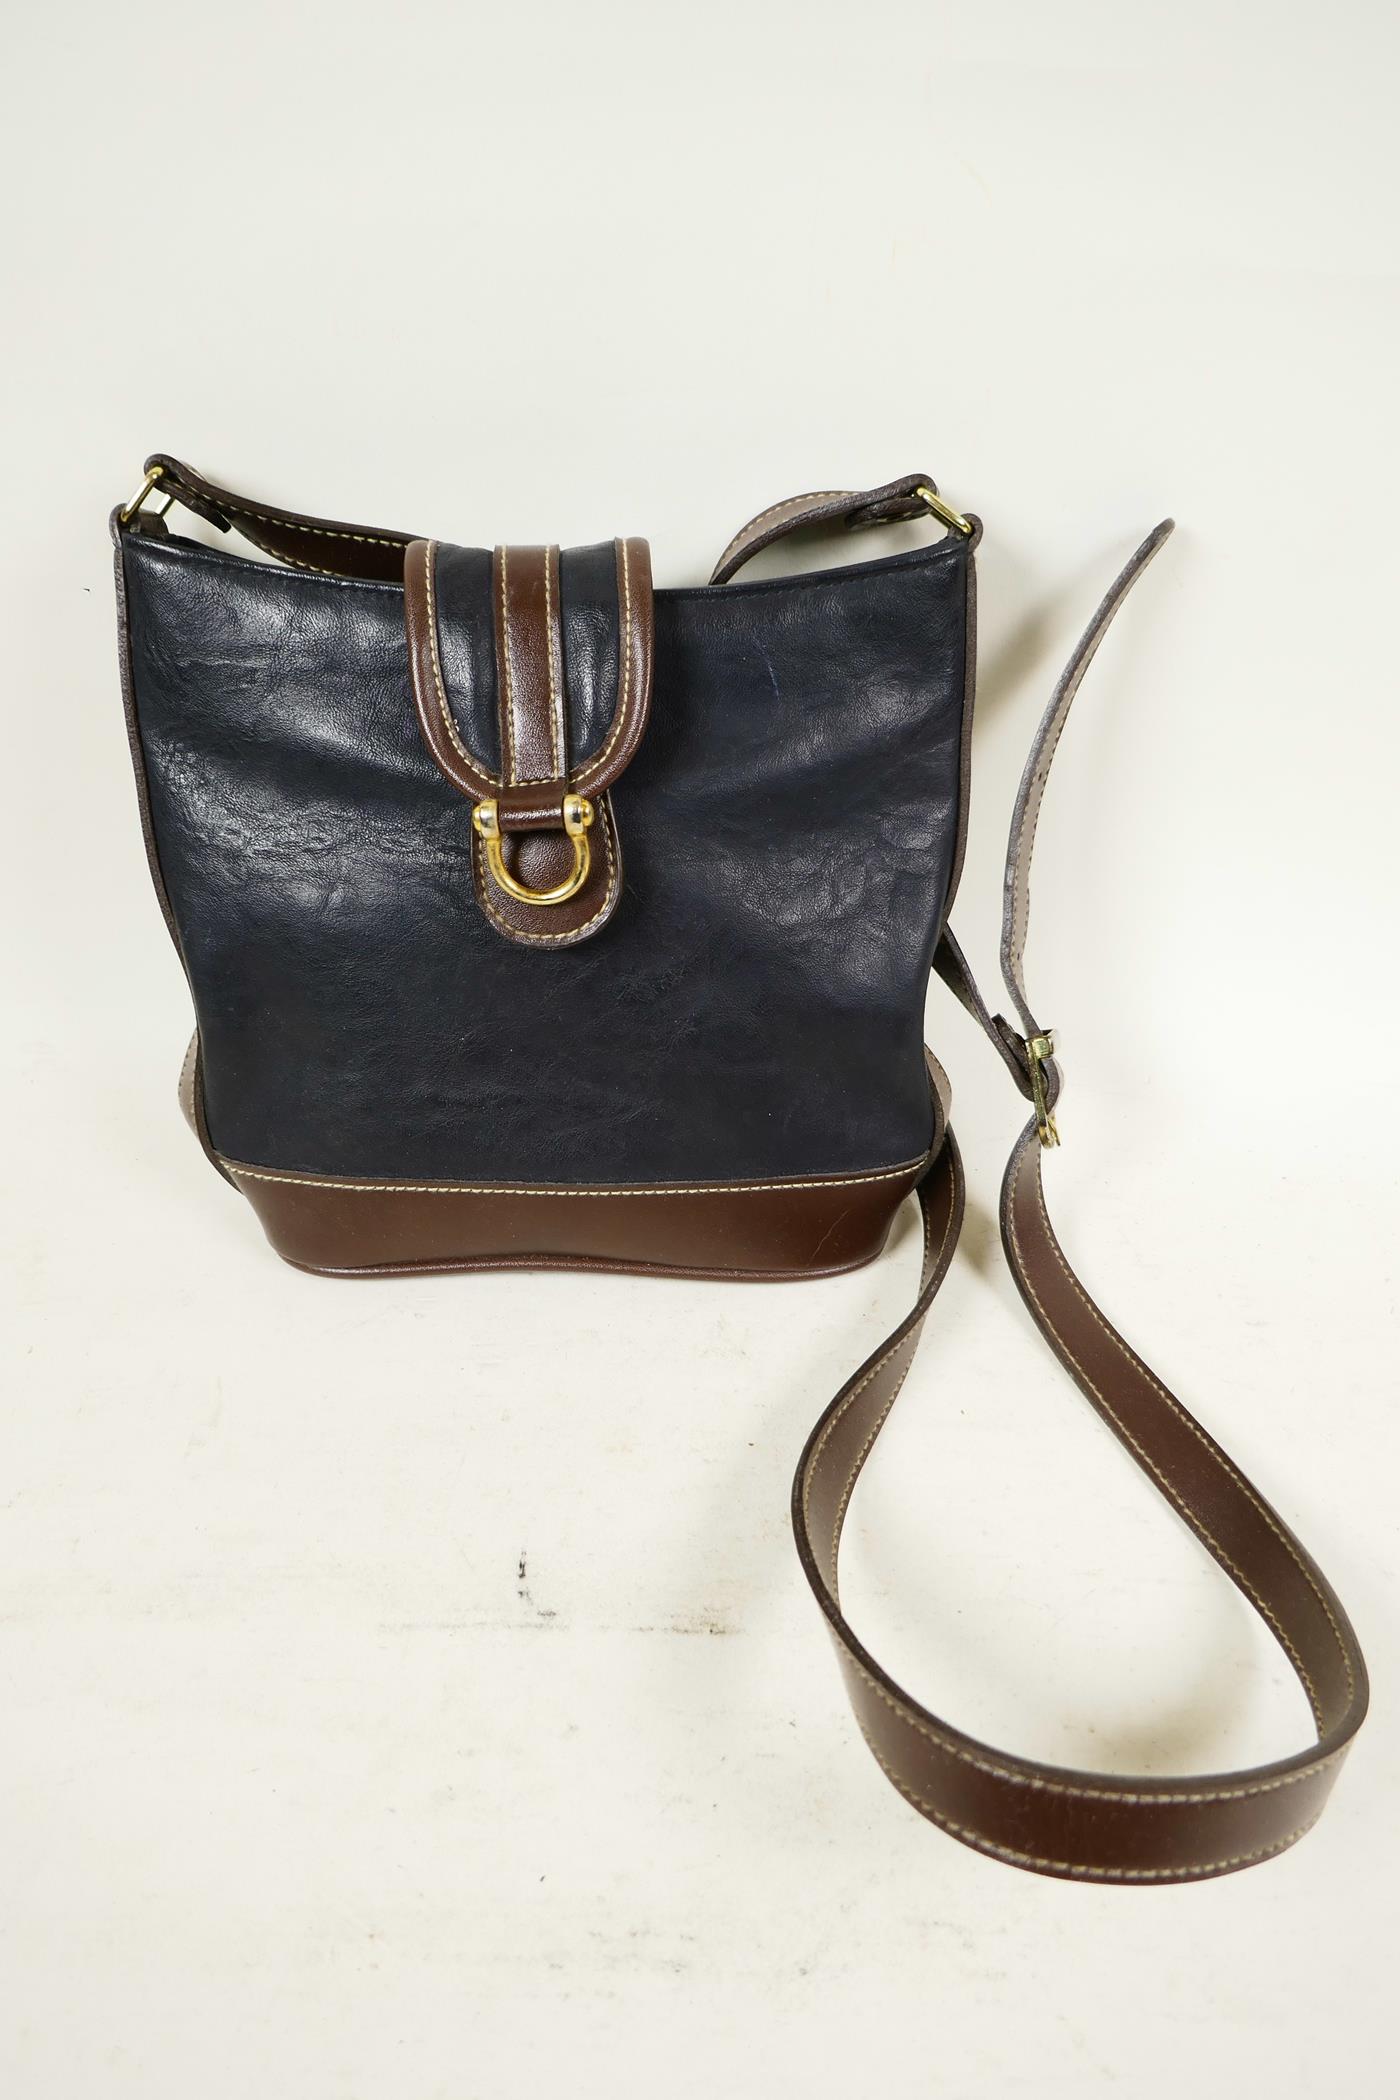 Four contemporary leather and faux leather handbags, including a new navy leather Radley small - Image 9 of 9